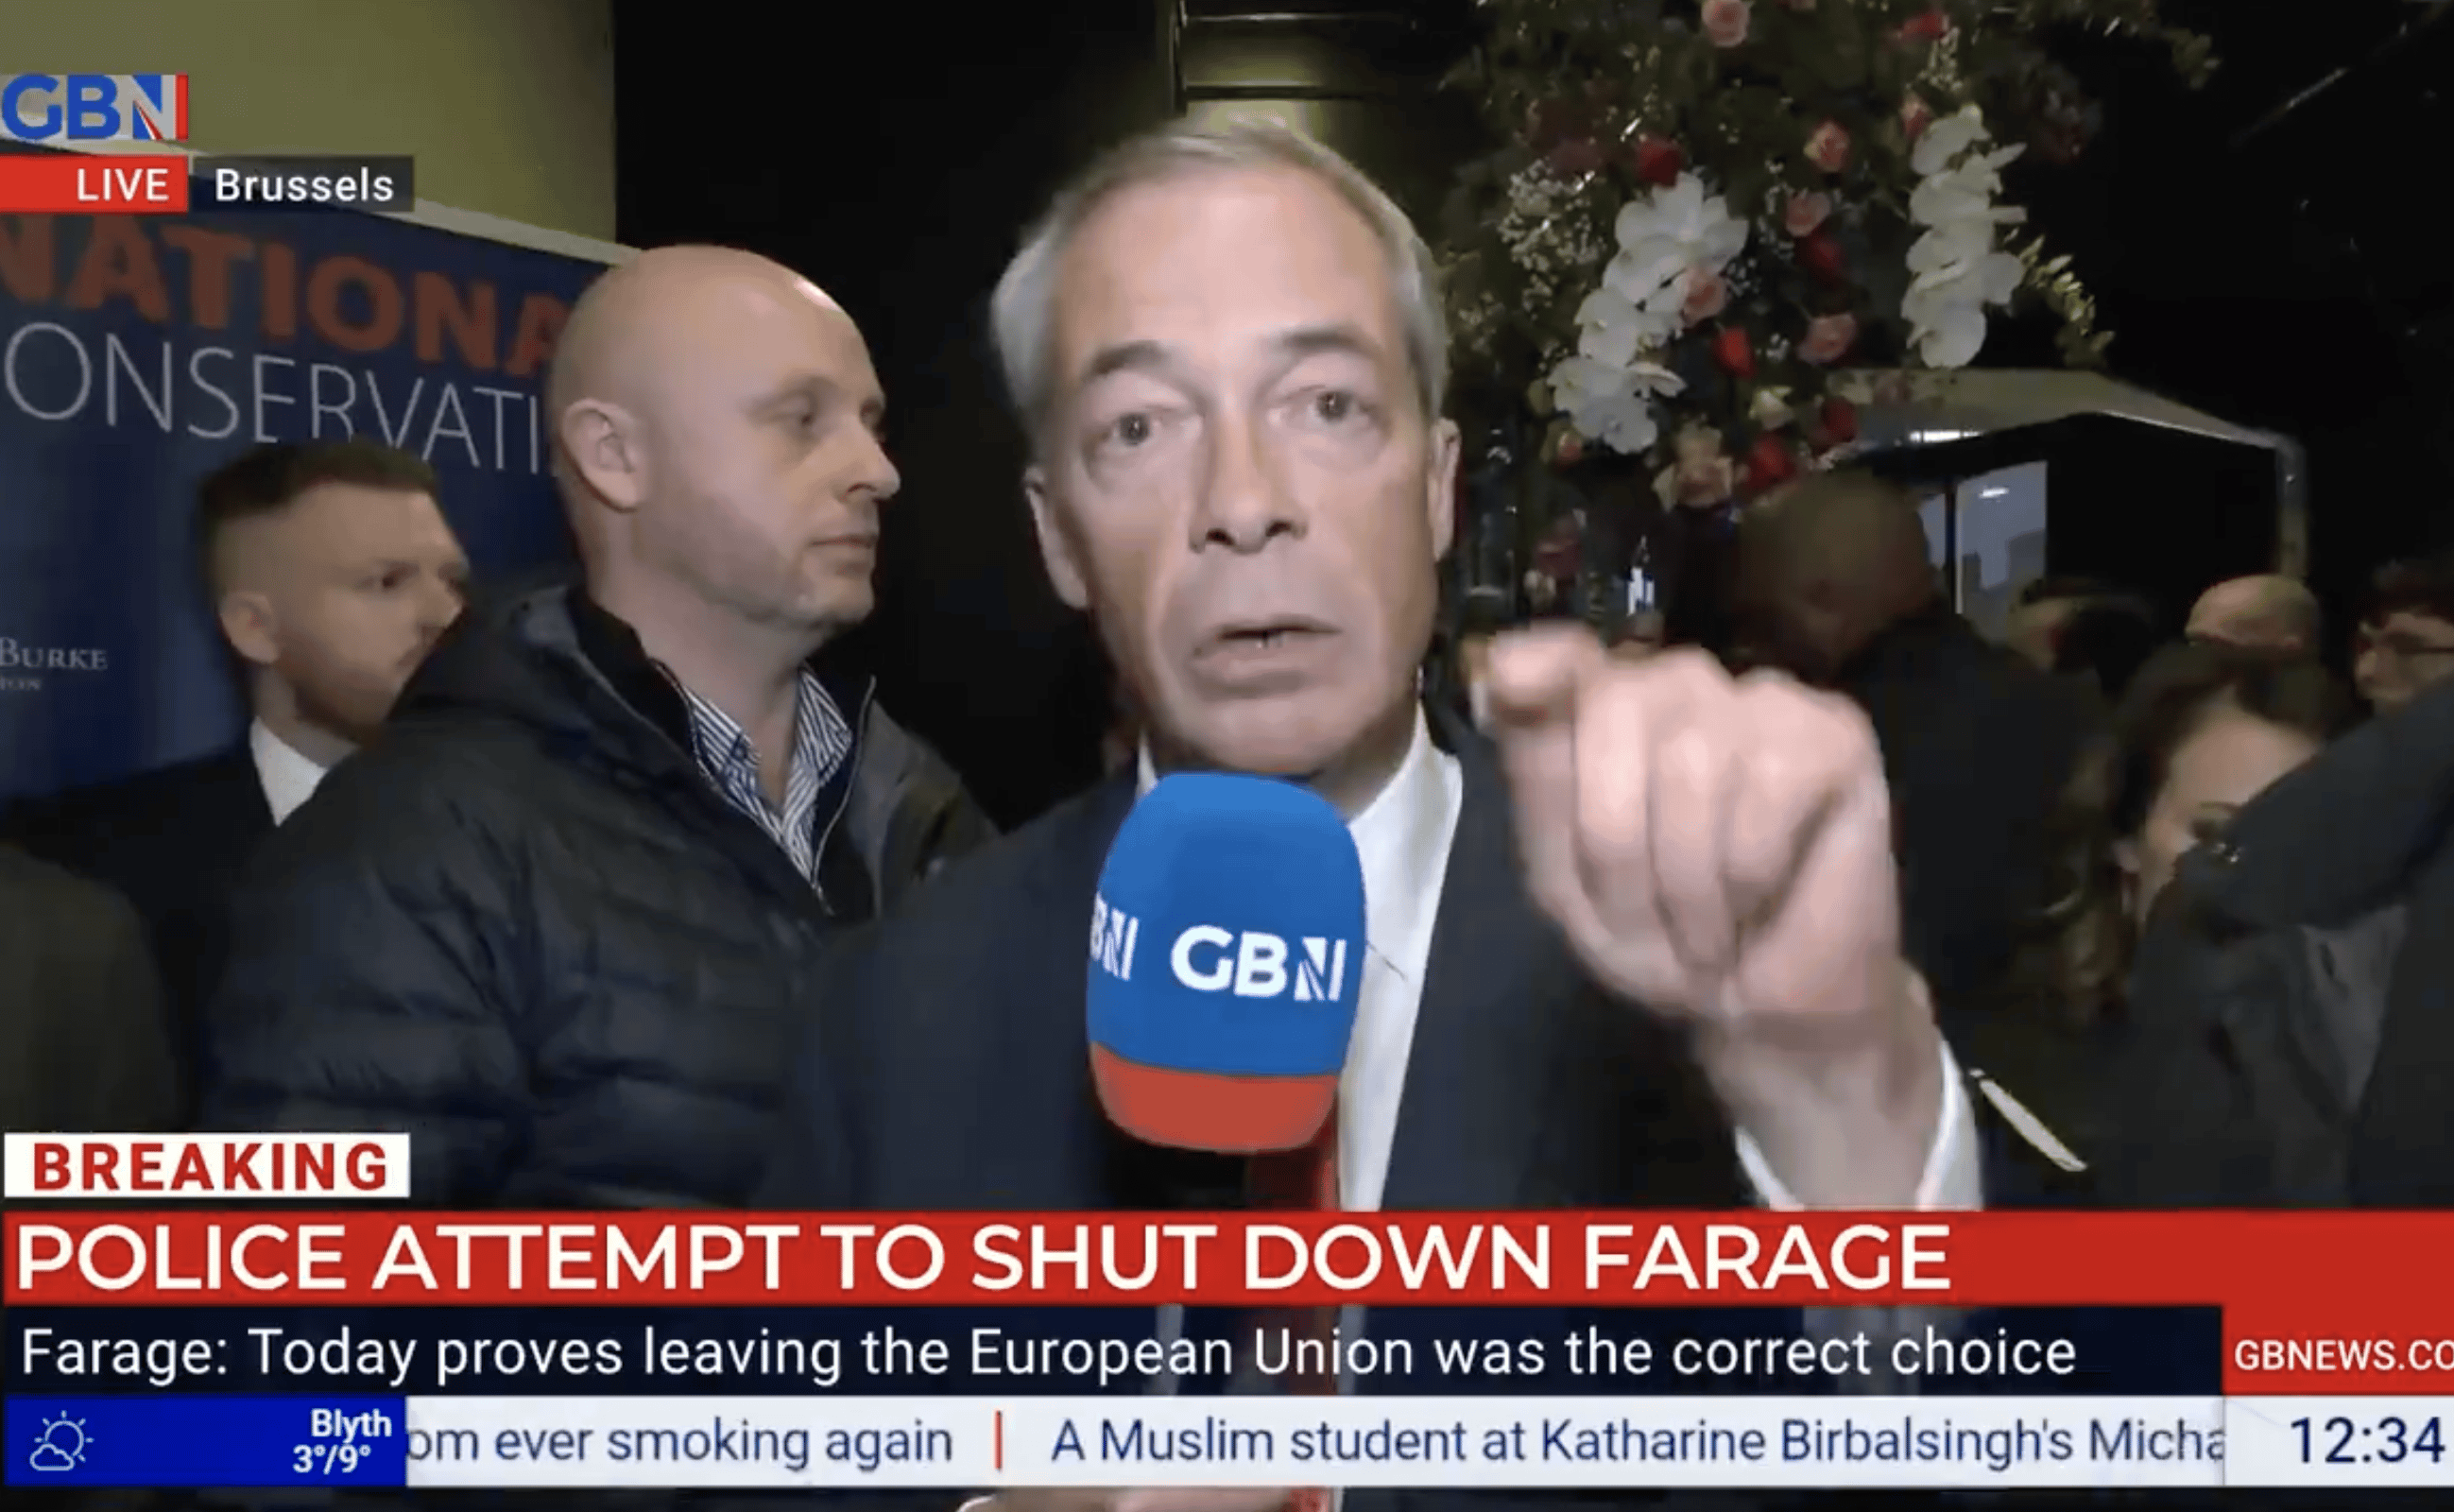 Farage reacts as police shut down conference he was speaking at